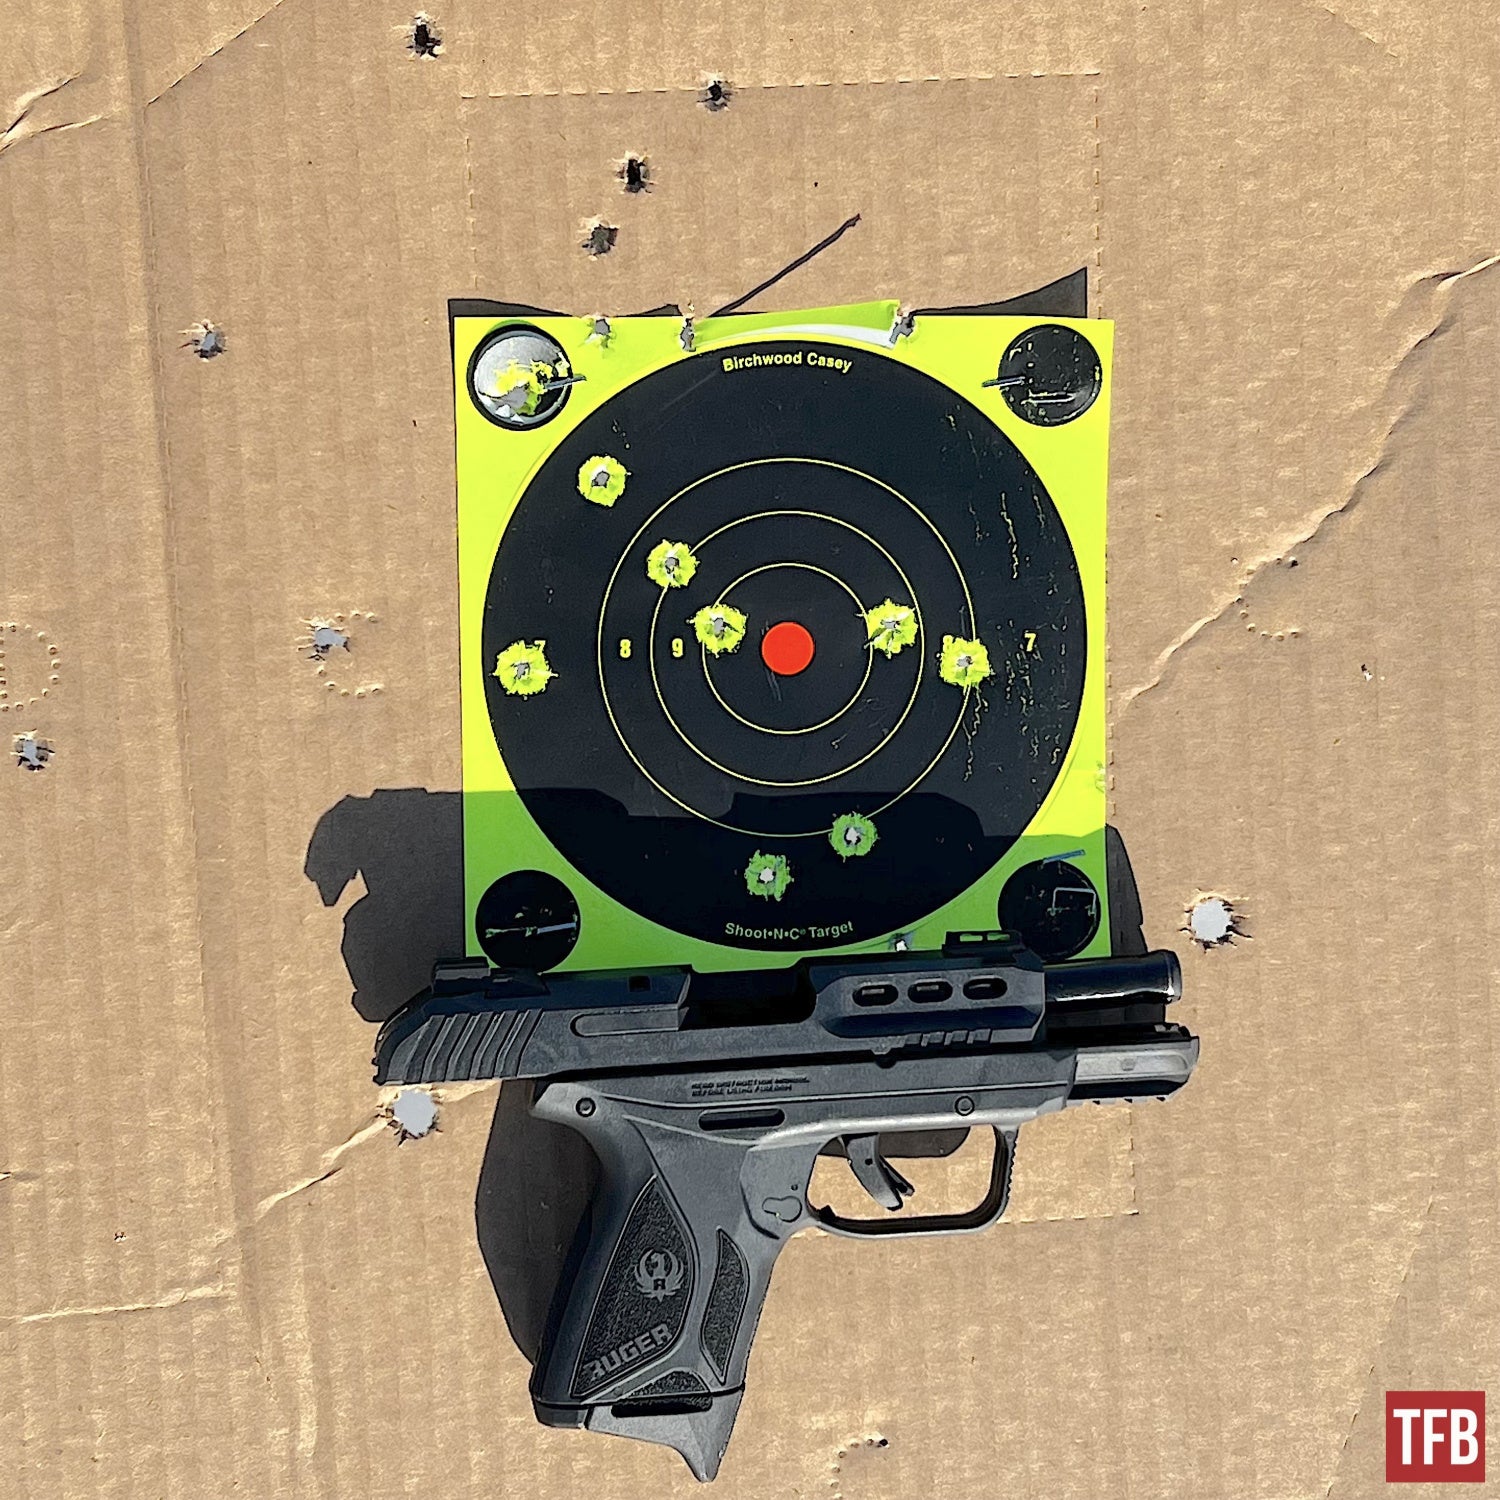 Accuracy at 25 yards is somewhat more difficult with this pistol